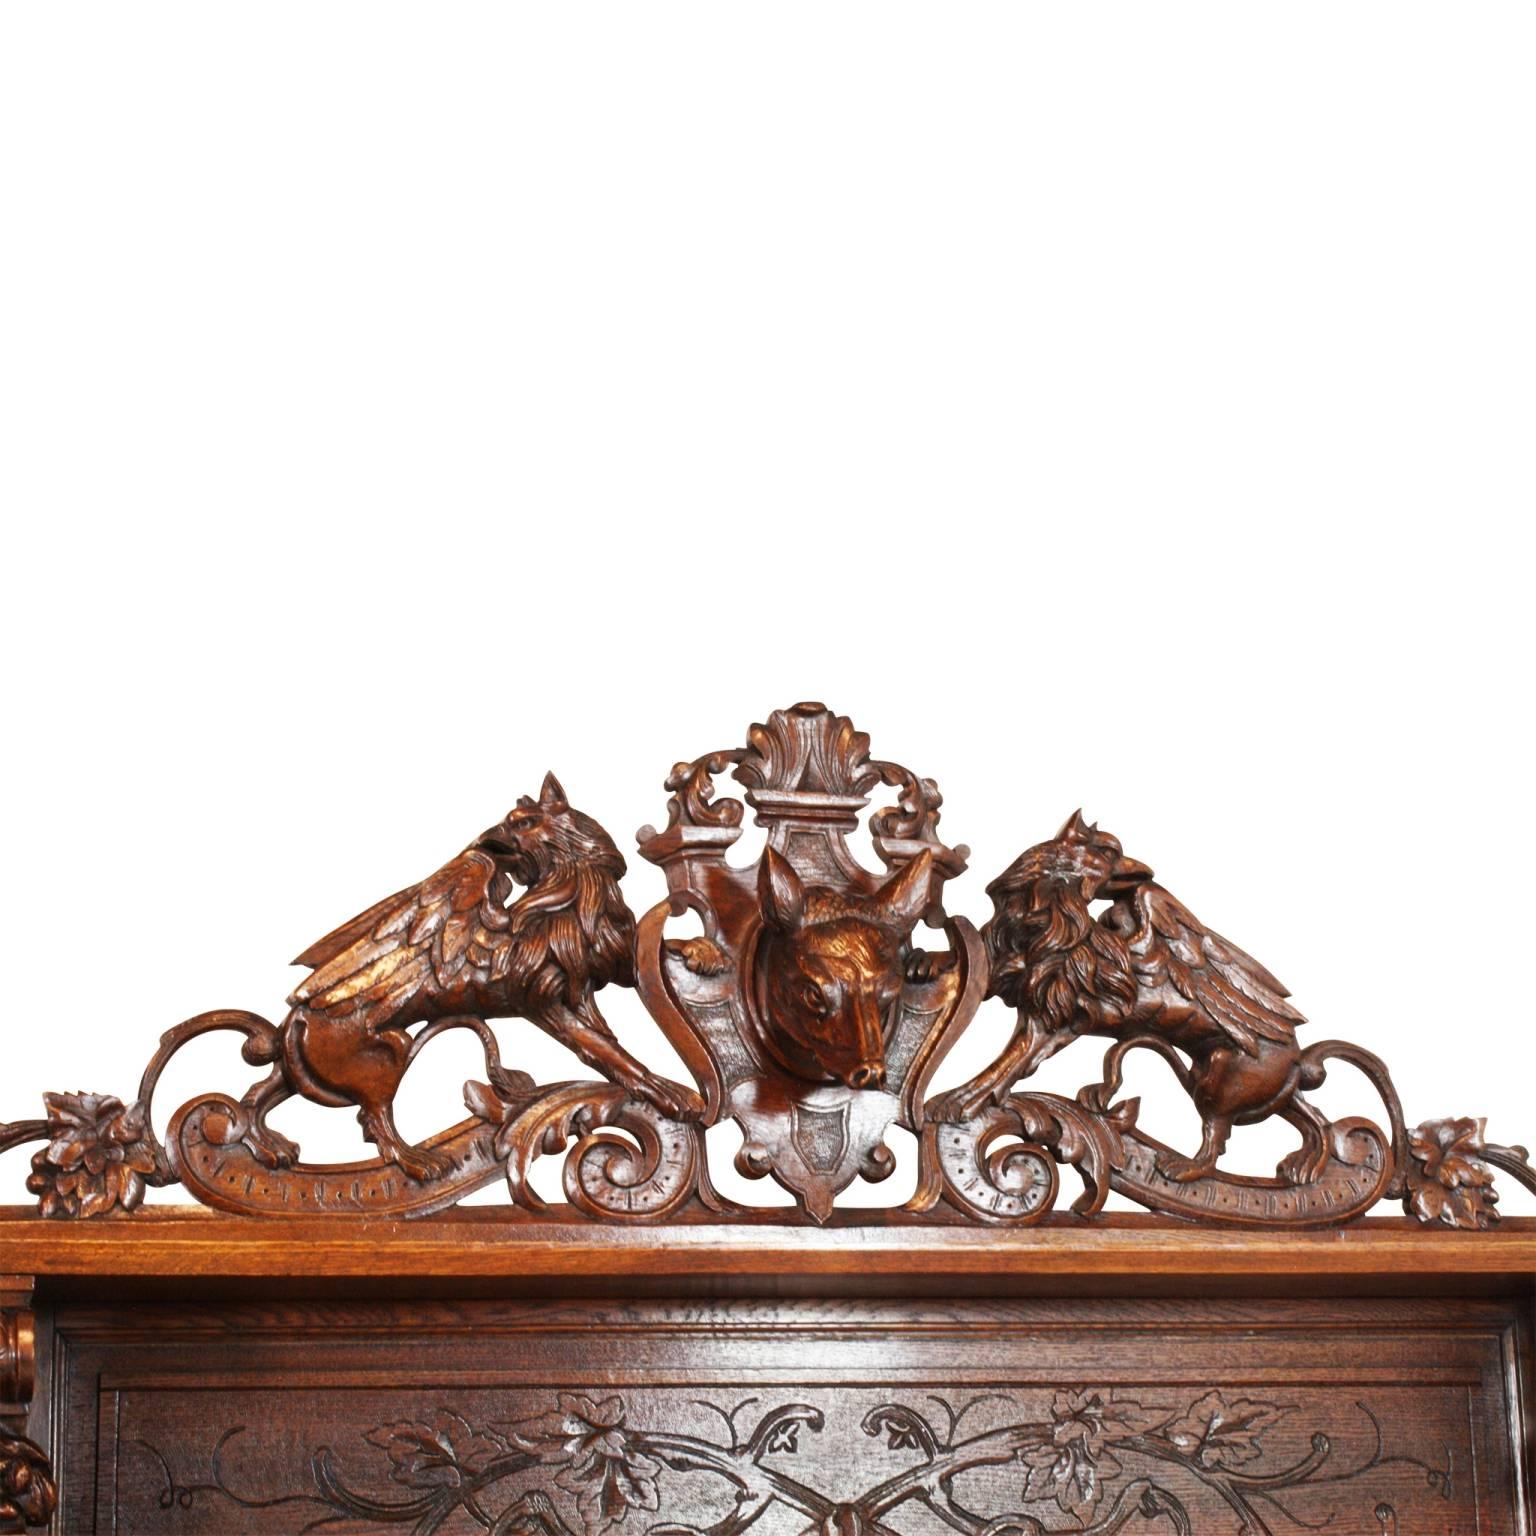 One of the finest examples we have had in our shop of French hunt cabinetry.
The lighter stain shows off the carvings and detail much better than many pieces of this style in a darker walnut finish. The upper crown features a fox and griffins. The